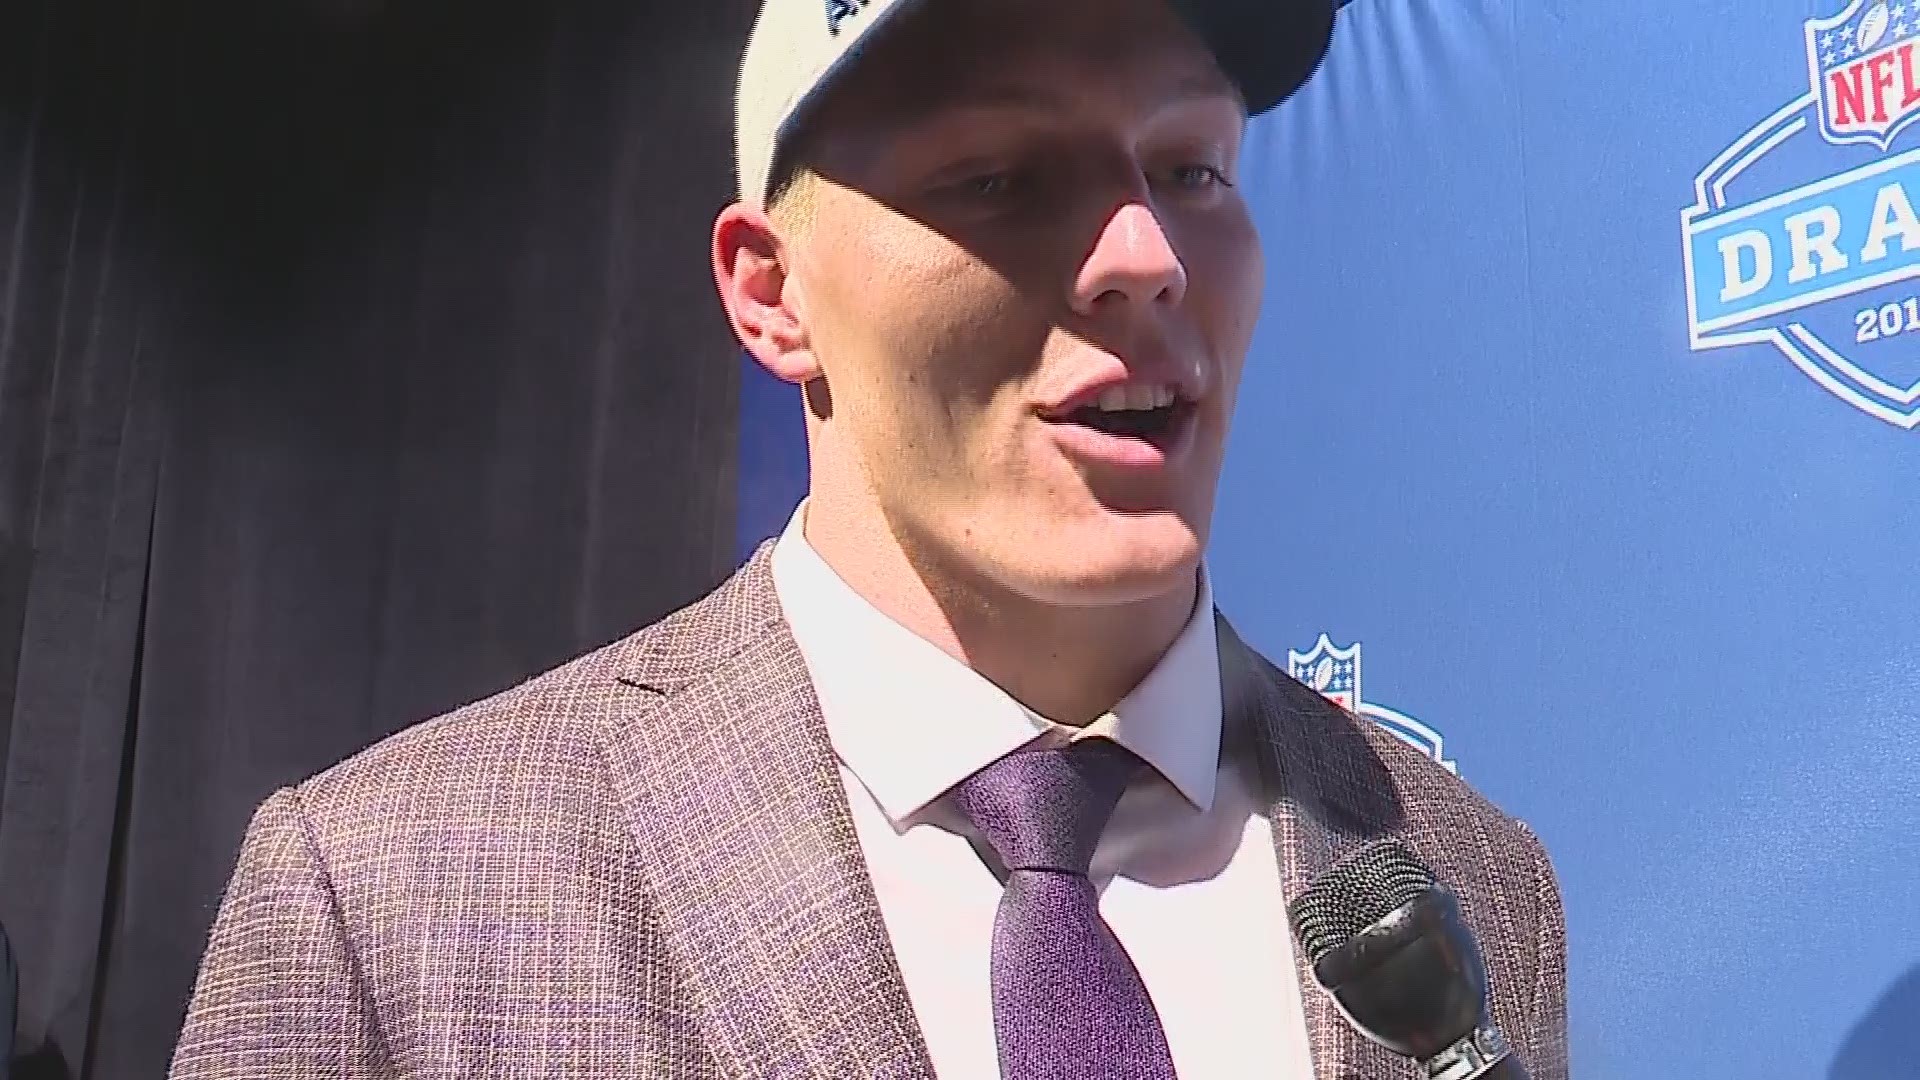 The newest Dallas Cowboys linebacker is 1st Round pick Leighton Vander Esch, who joined us 1-on-1 at AT&T Stadium, after he got the call from Jerry Jones.  He said Jerry tried to mess with him when he called, telling him it was the Packers who were callin